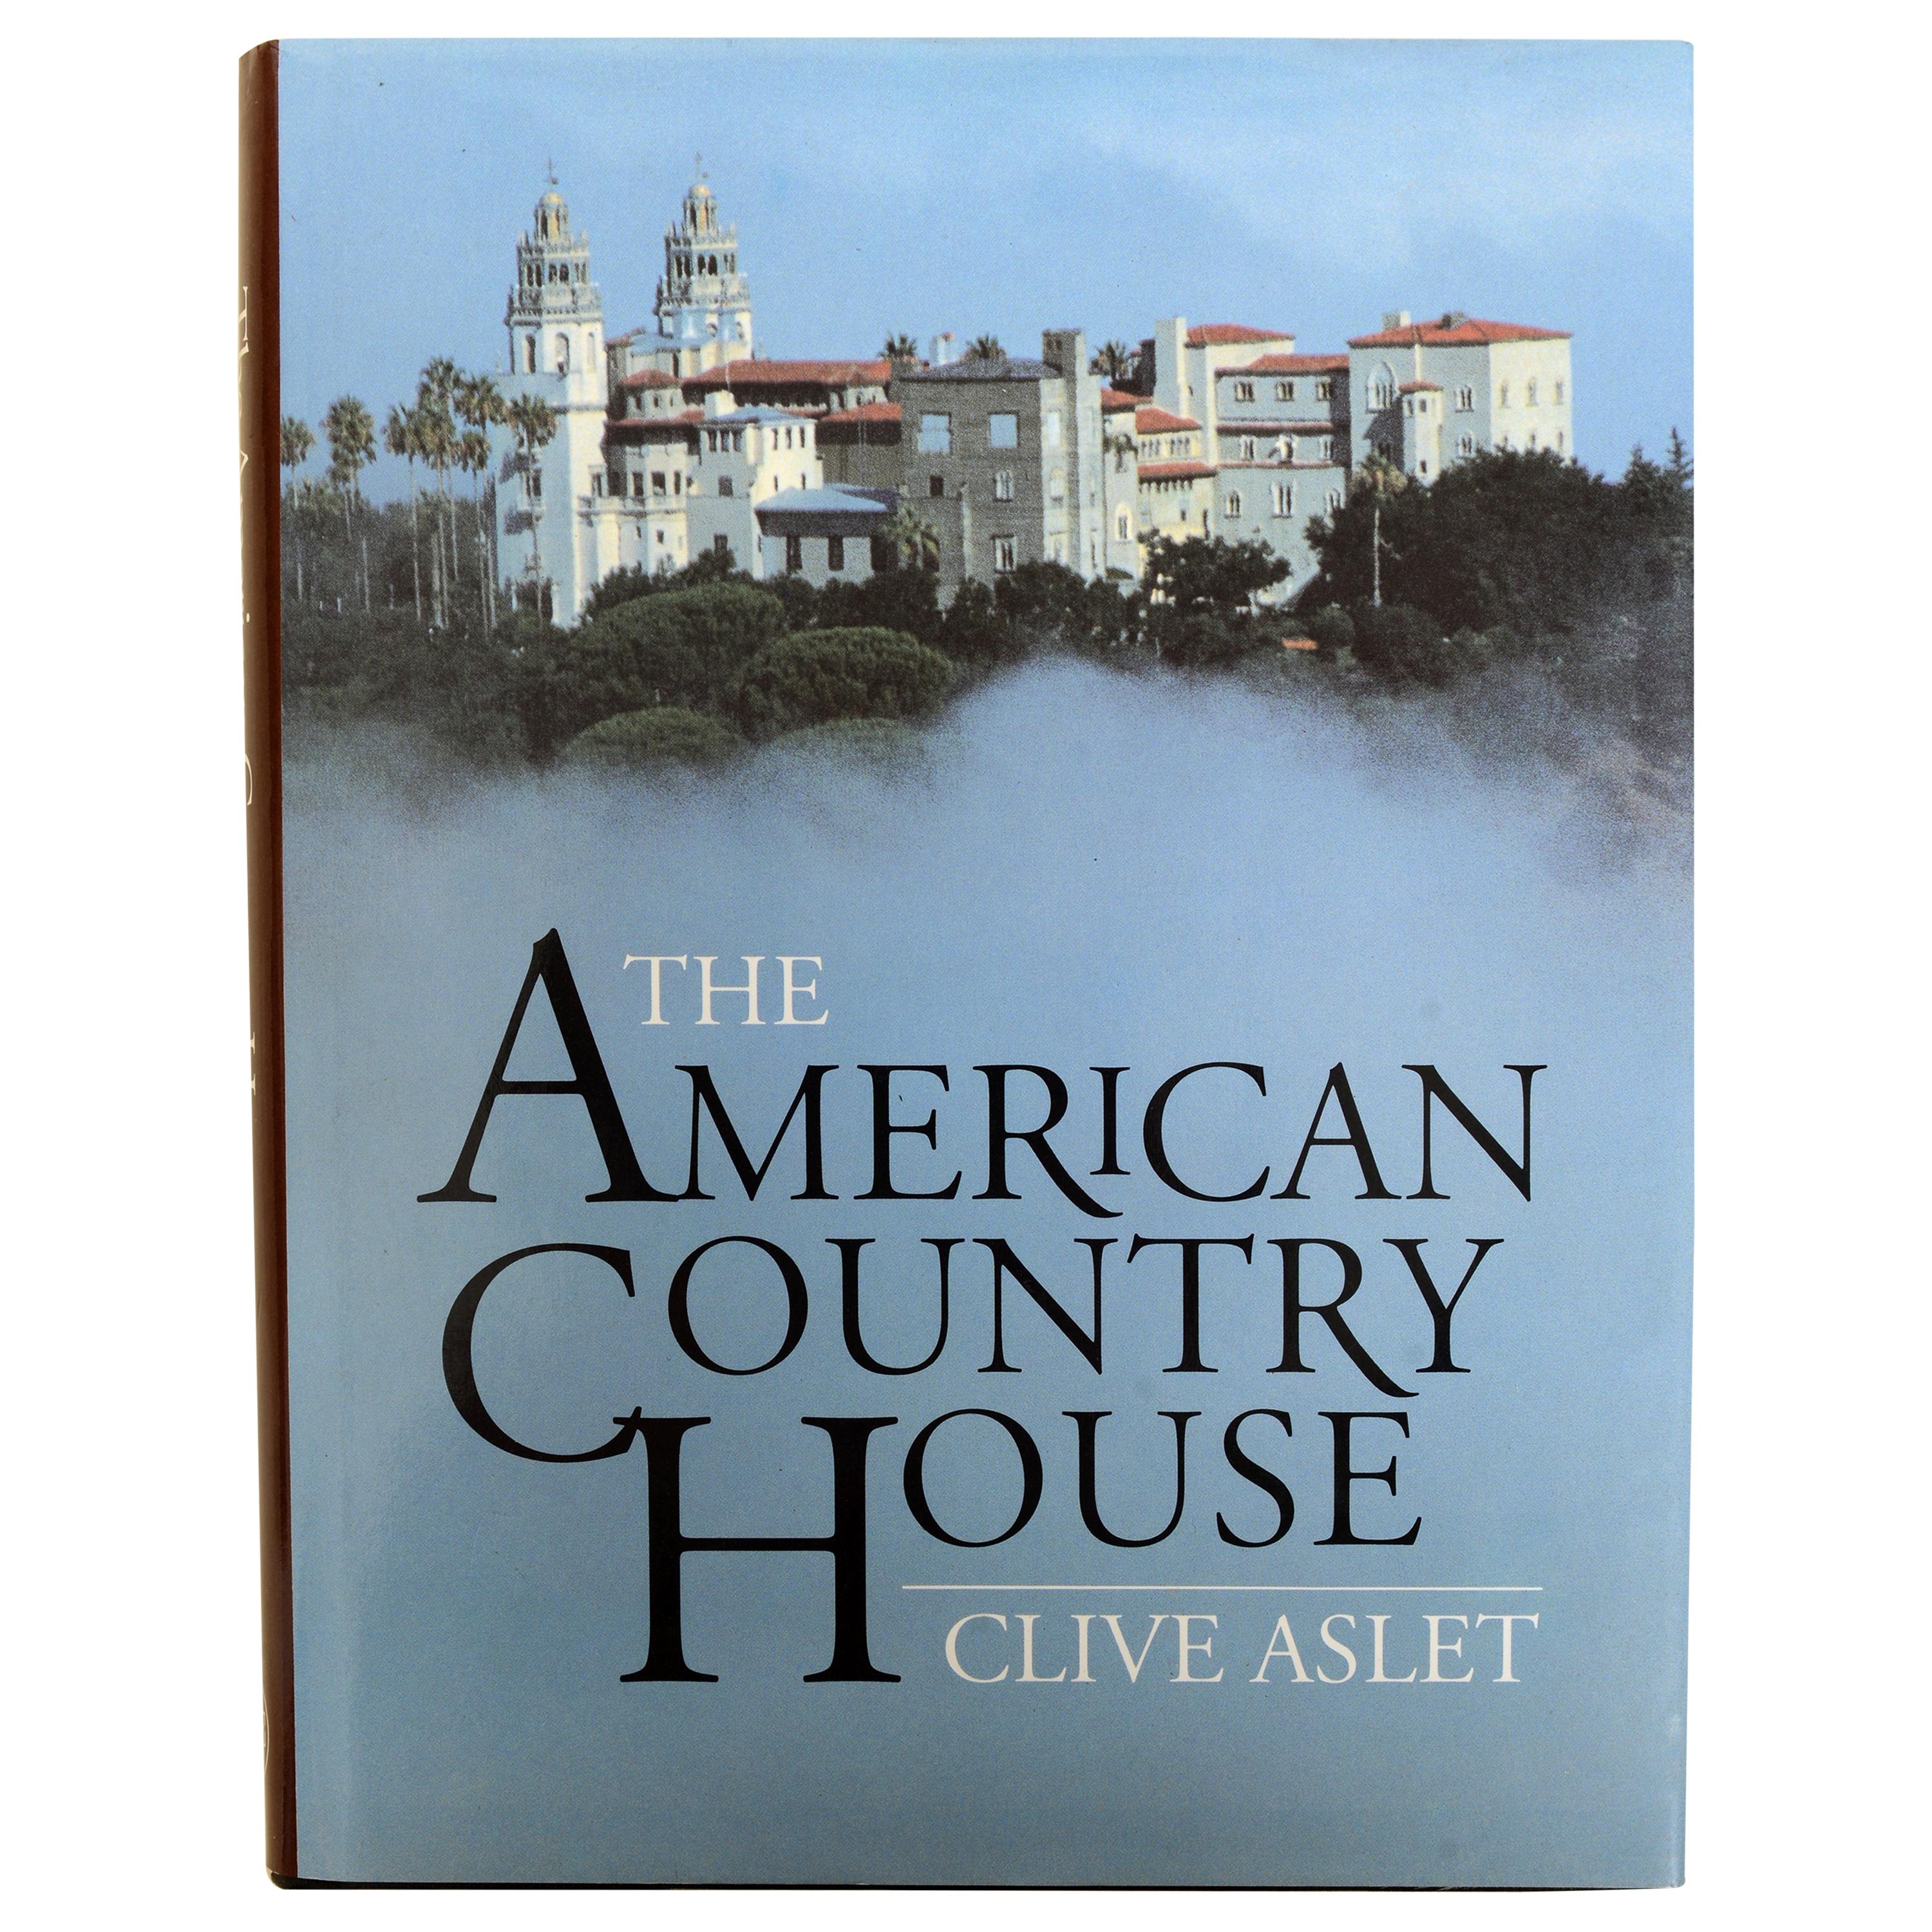 The American Country House by Clive Aslet, 1st Ed